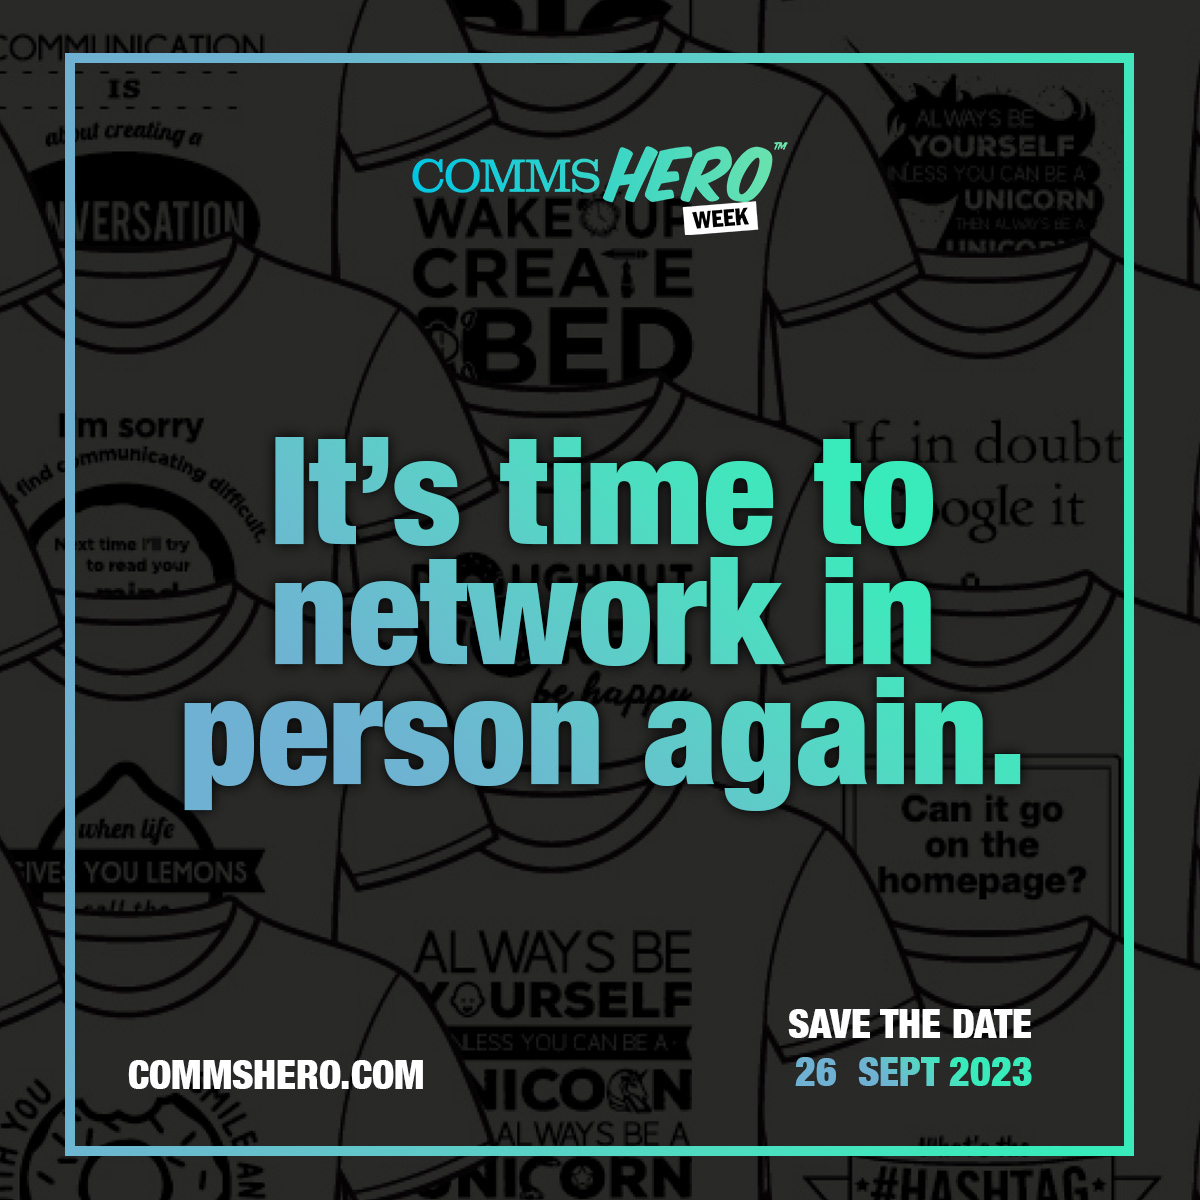 🚨 SAVE THE DATE 🚨

We're excited to announce that we're hosting the first #CommsHero in-person event since 2019 in Manchester on the 26 September as part of #CommsHero Week 2023. 

We will also be hosting the FIRST EVER CommsHero awards on this day, more details coming soon 👀